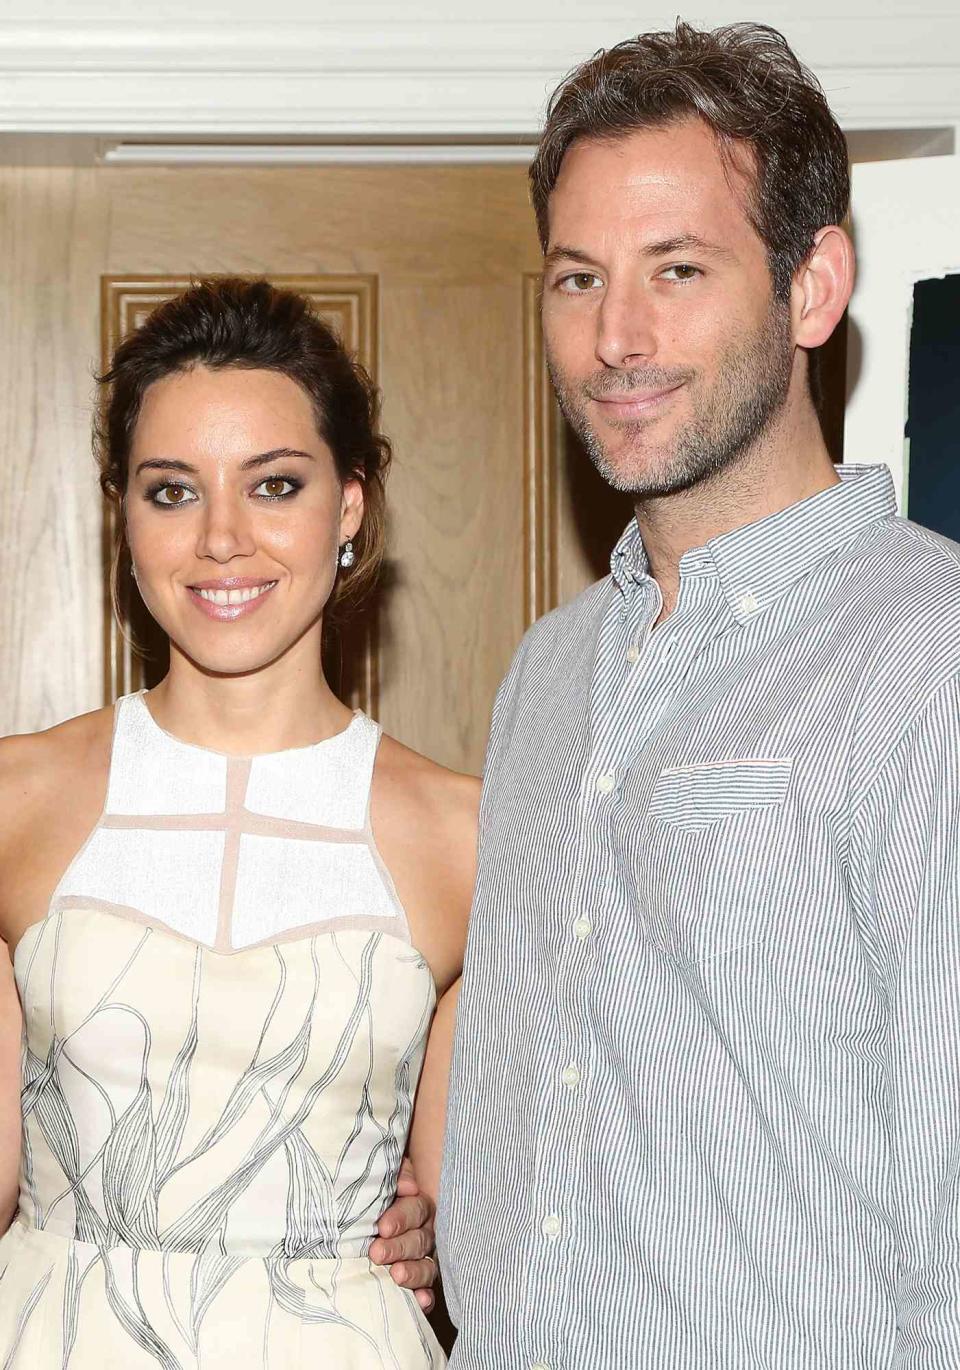 Aubrey Plaza (L) and writer/director Jeff Baena attend the "Life After Beth" New York Screening at Crosby Street Hotel on July 30, 2014 in New York City